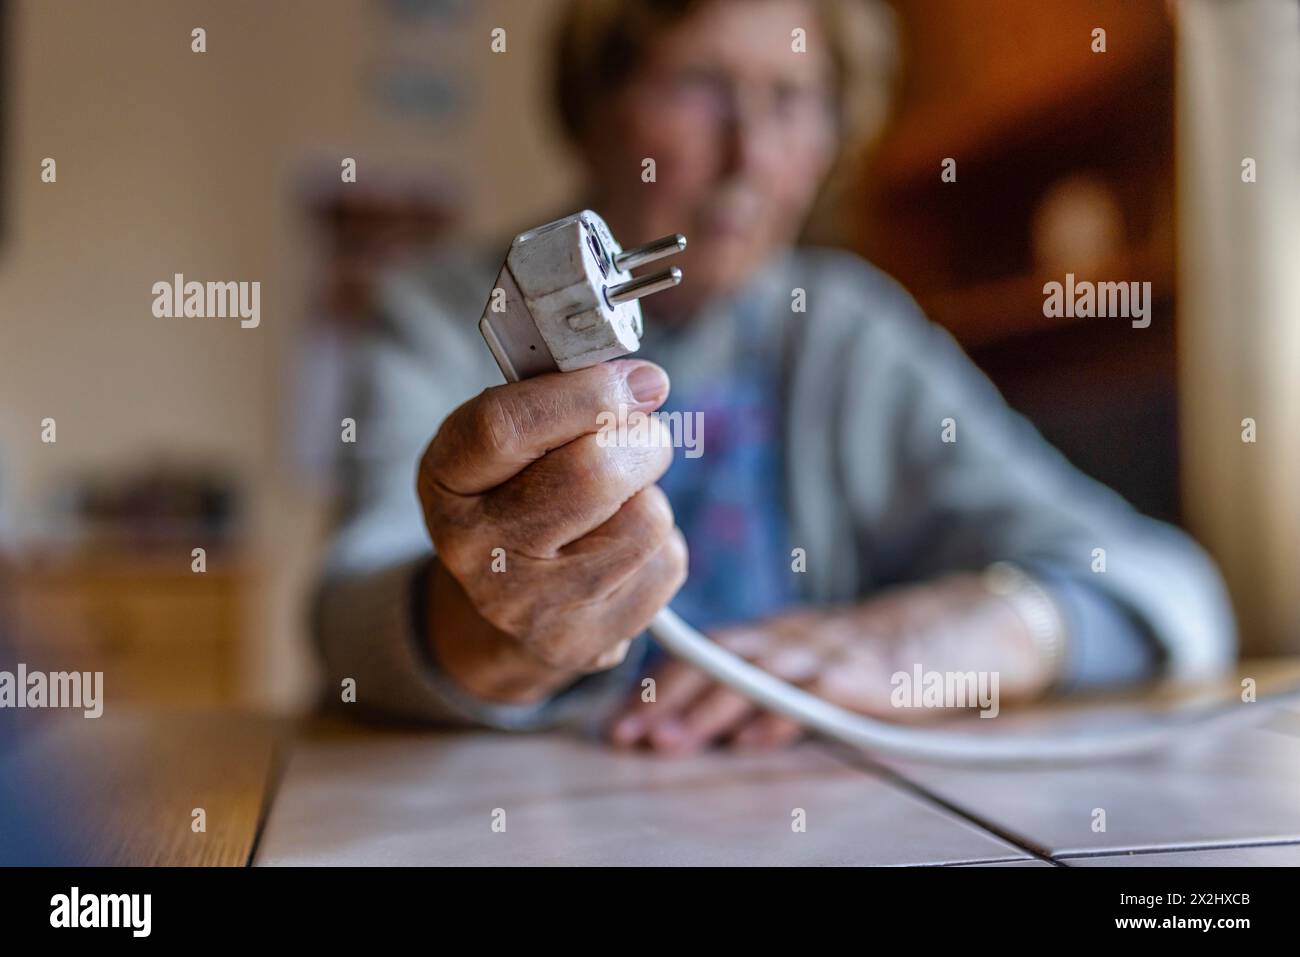 Senior citizen holding a power cable with plug in her hand at home, symbolising energy costs and poverty, Cologne, North Rhine-Westphalia, Germany Stock Photo